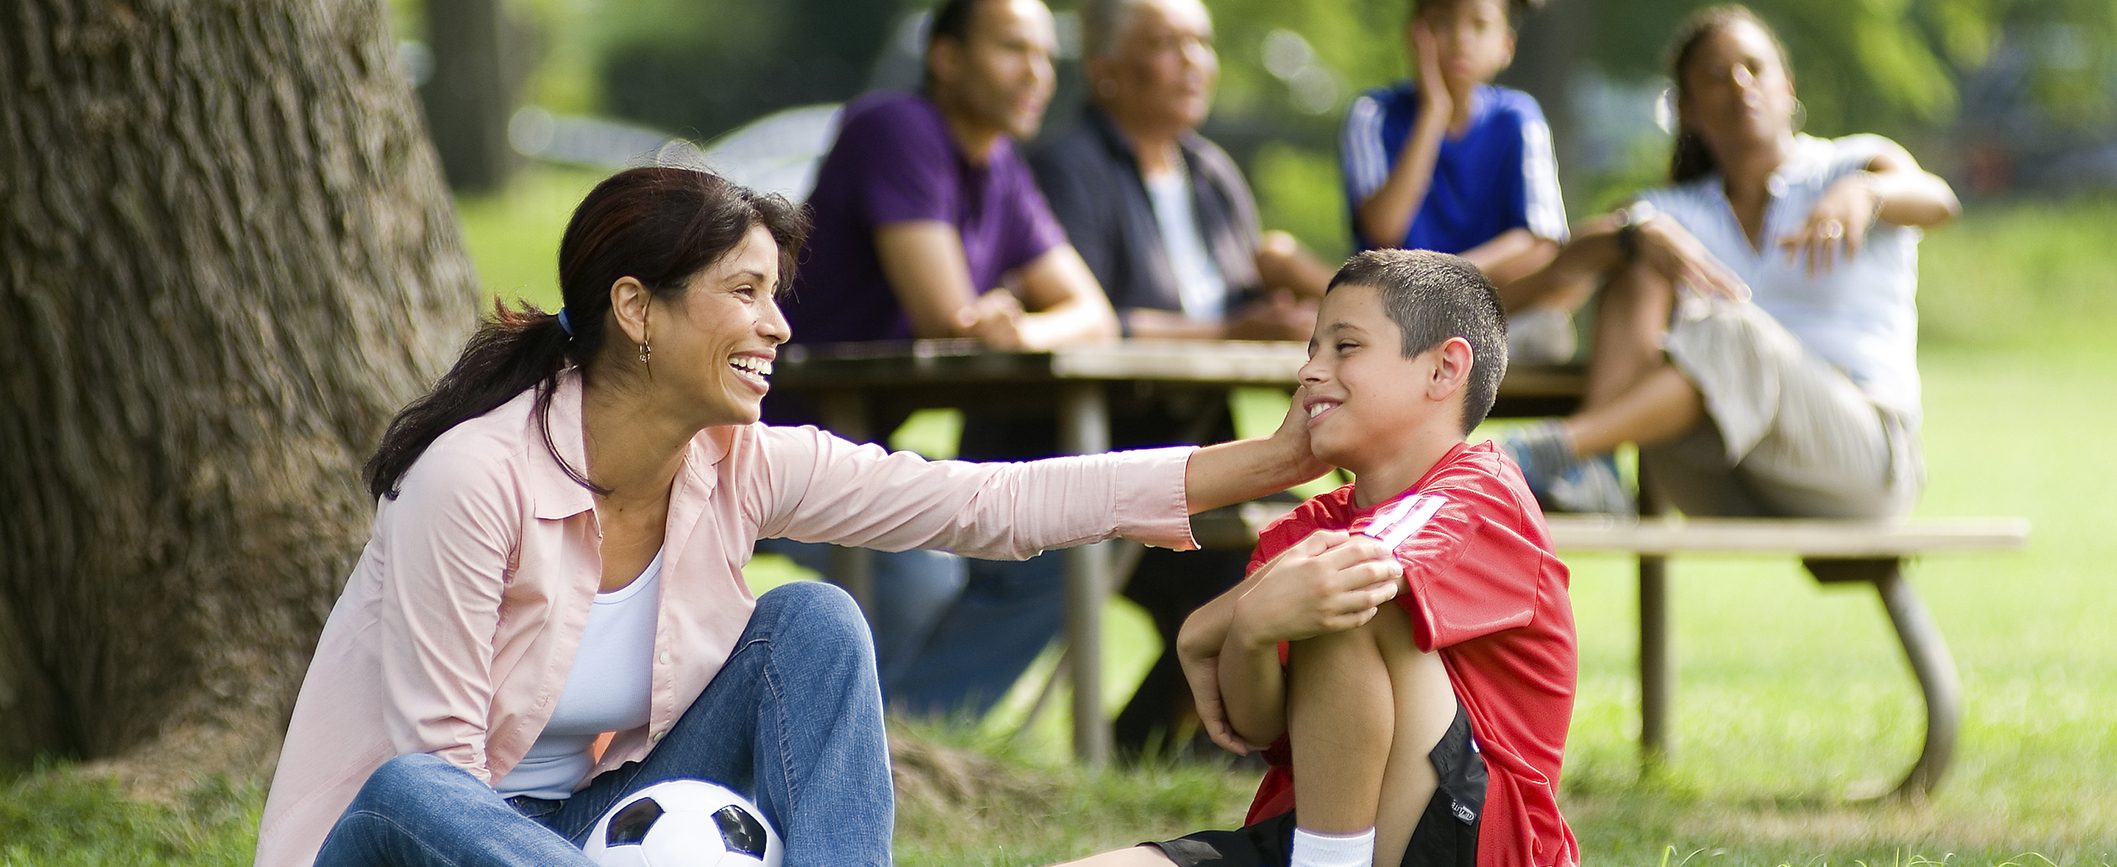 A woman and her young son share a moment together after a soccer game.